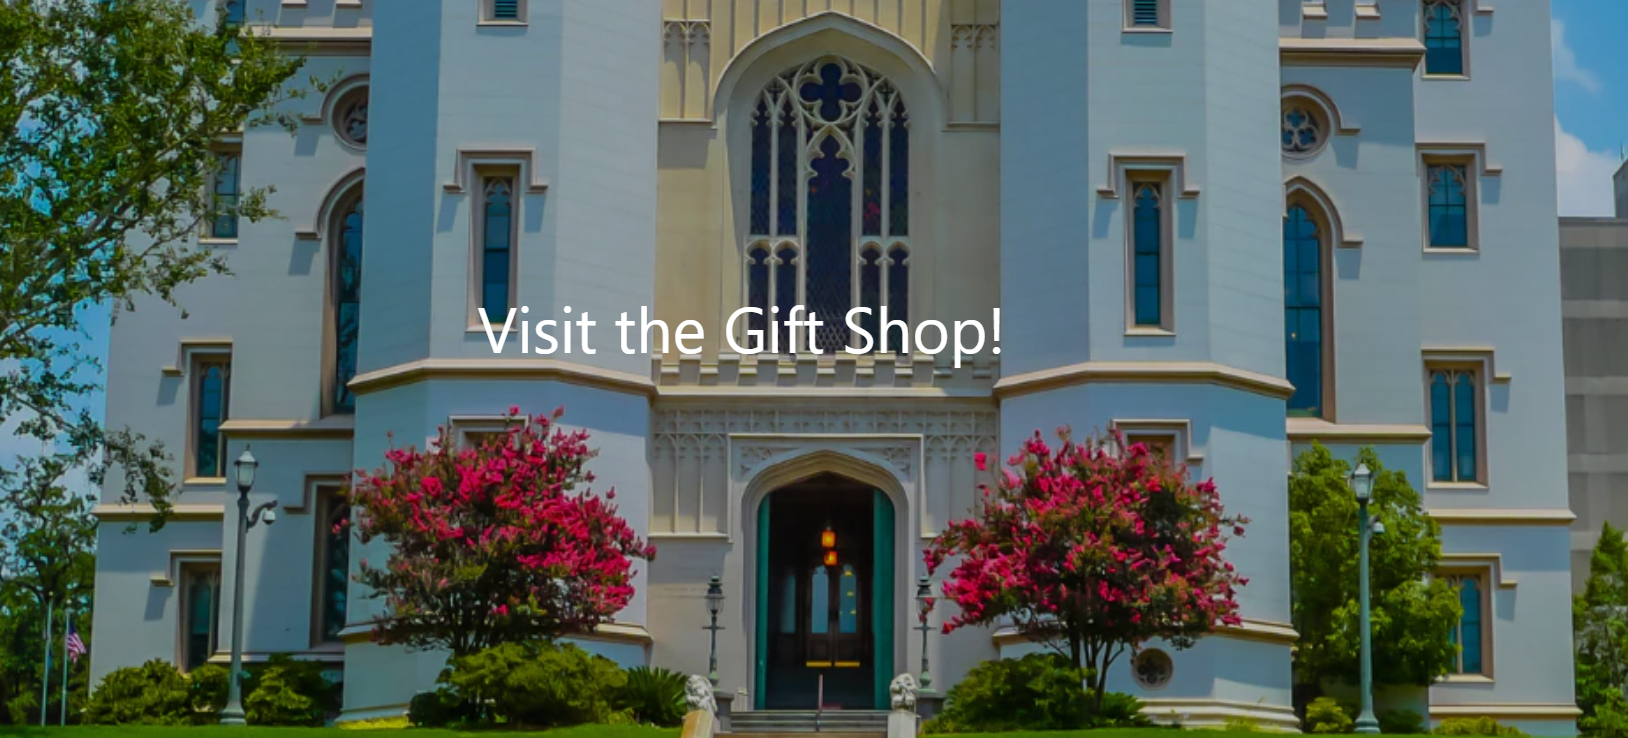 Louisiana Gifts and Gallery, Inc